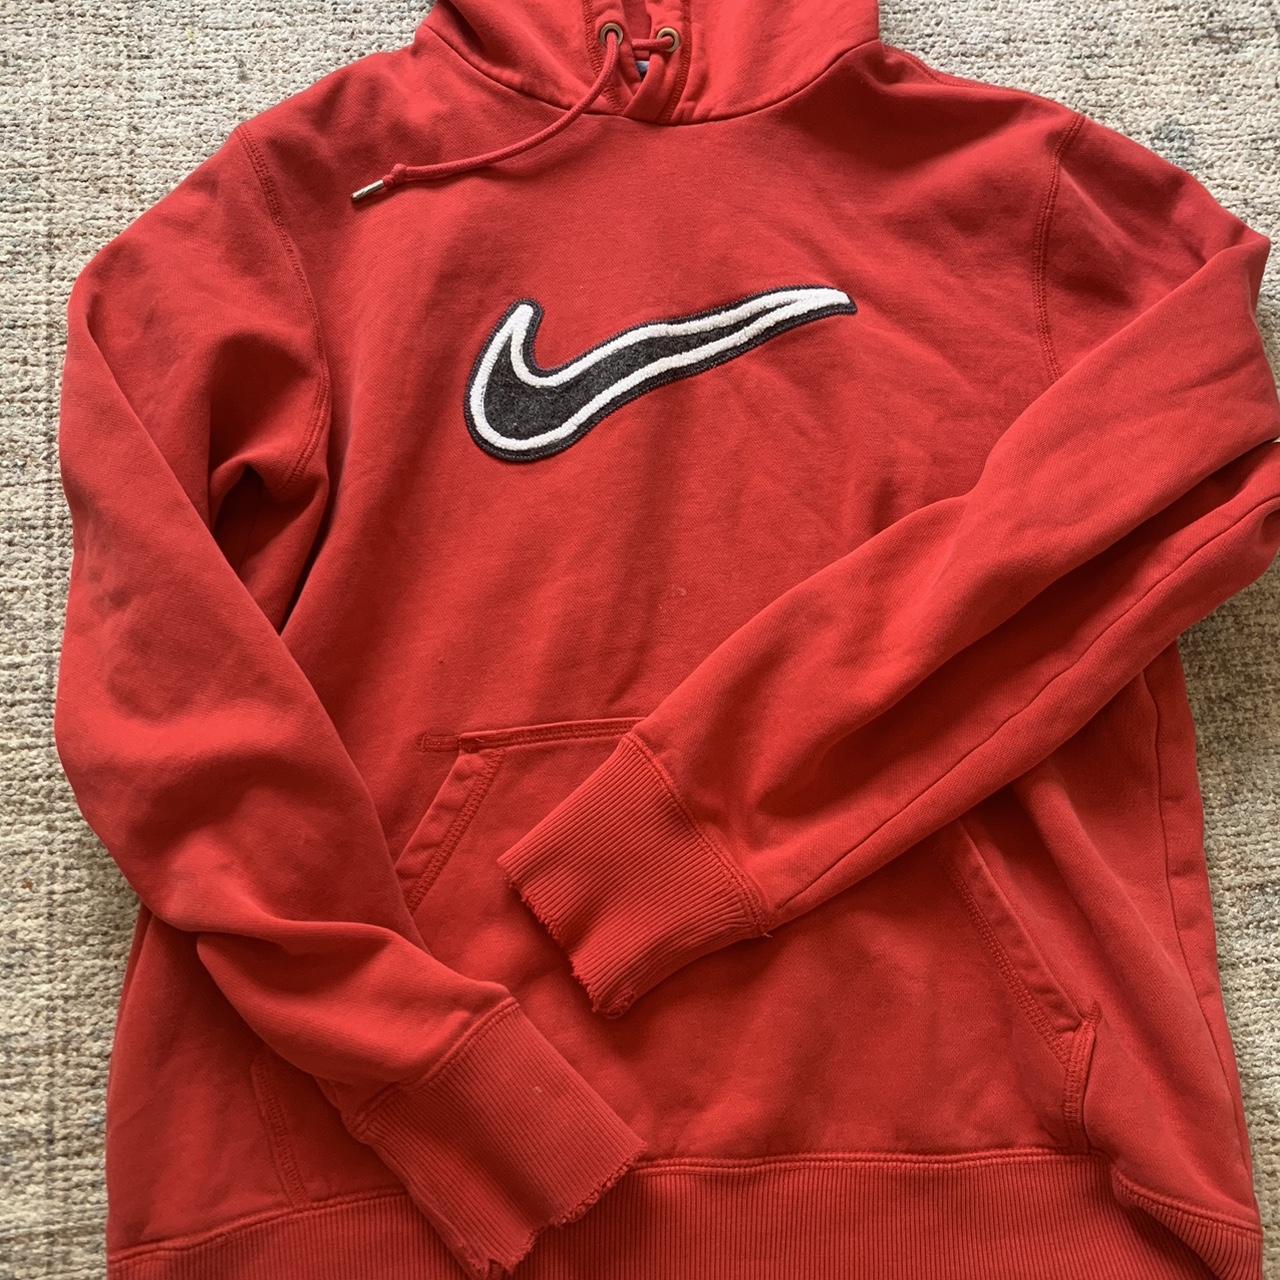 Nike Women's White and Red Hoodie (4)